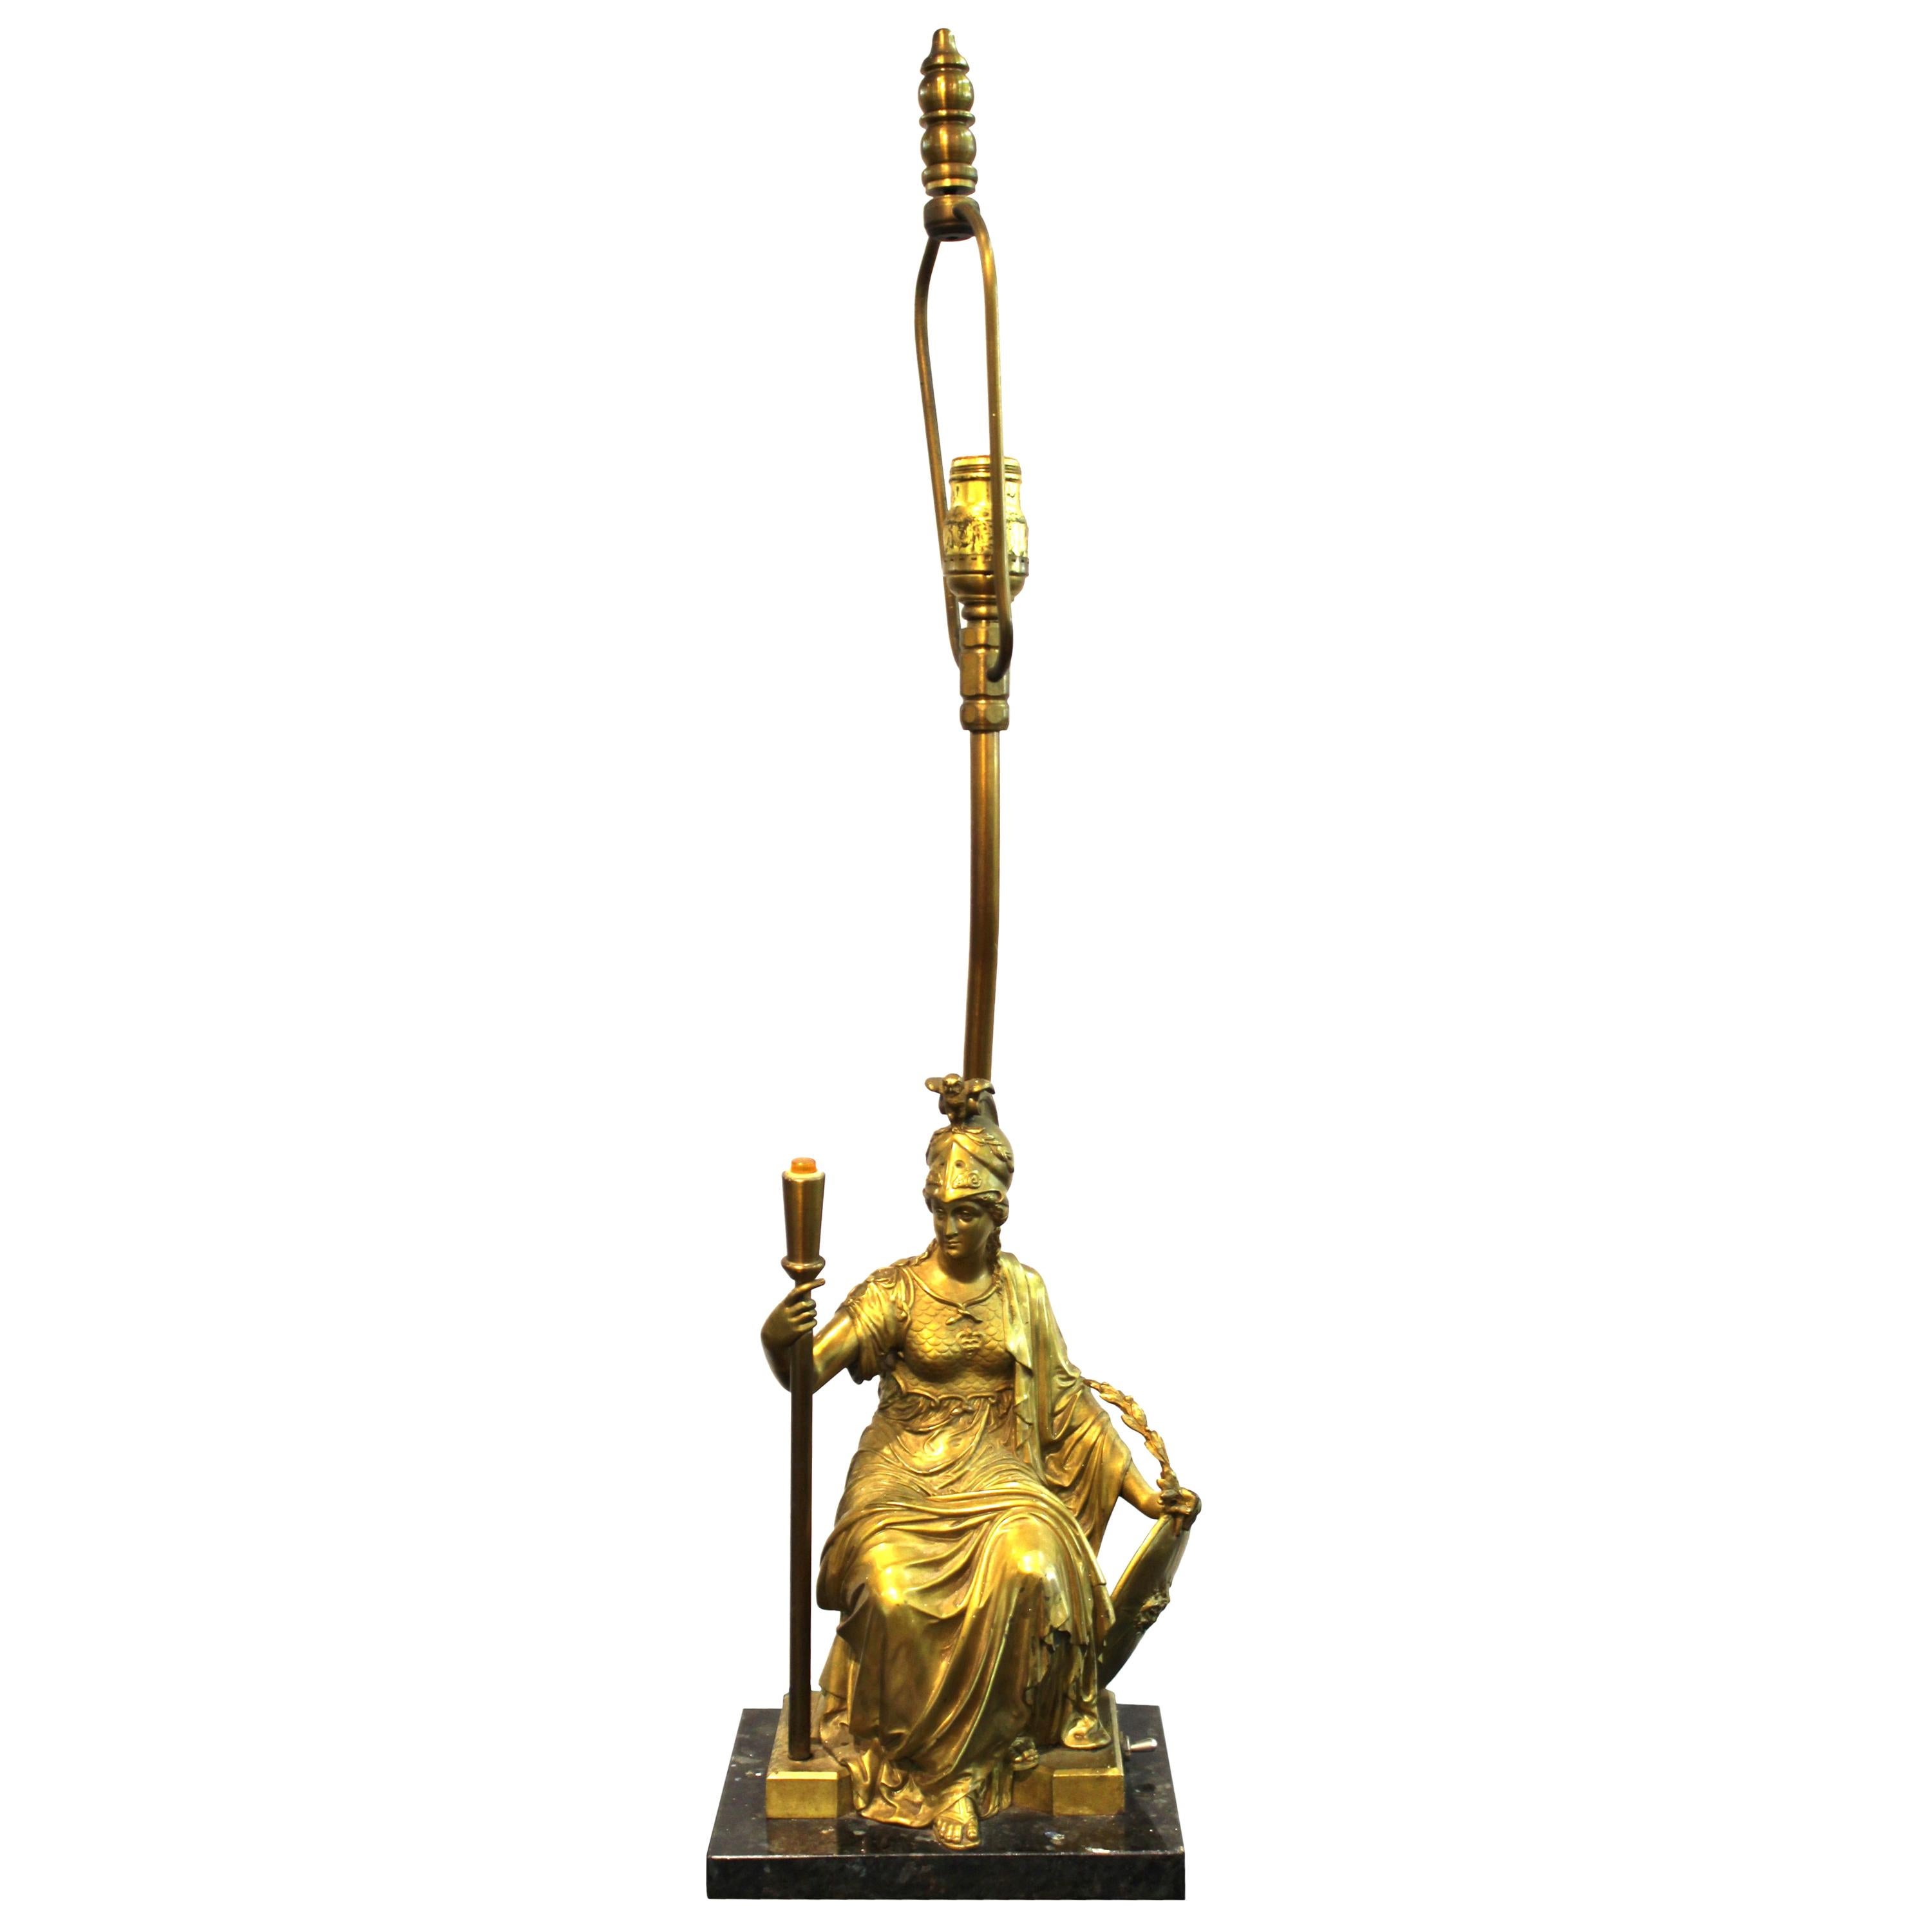 French Neoclassical Revival Style Table Lamp With Seated Bronze Athena Sculpture